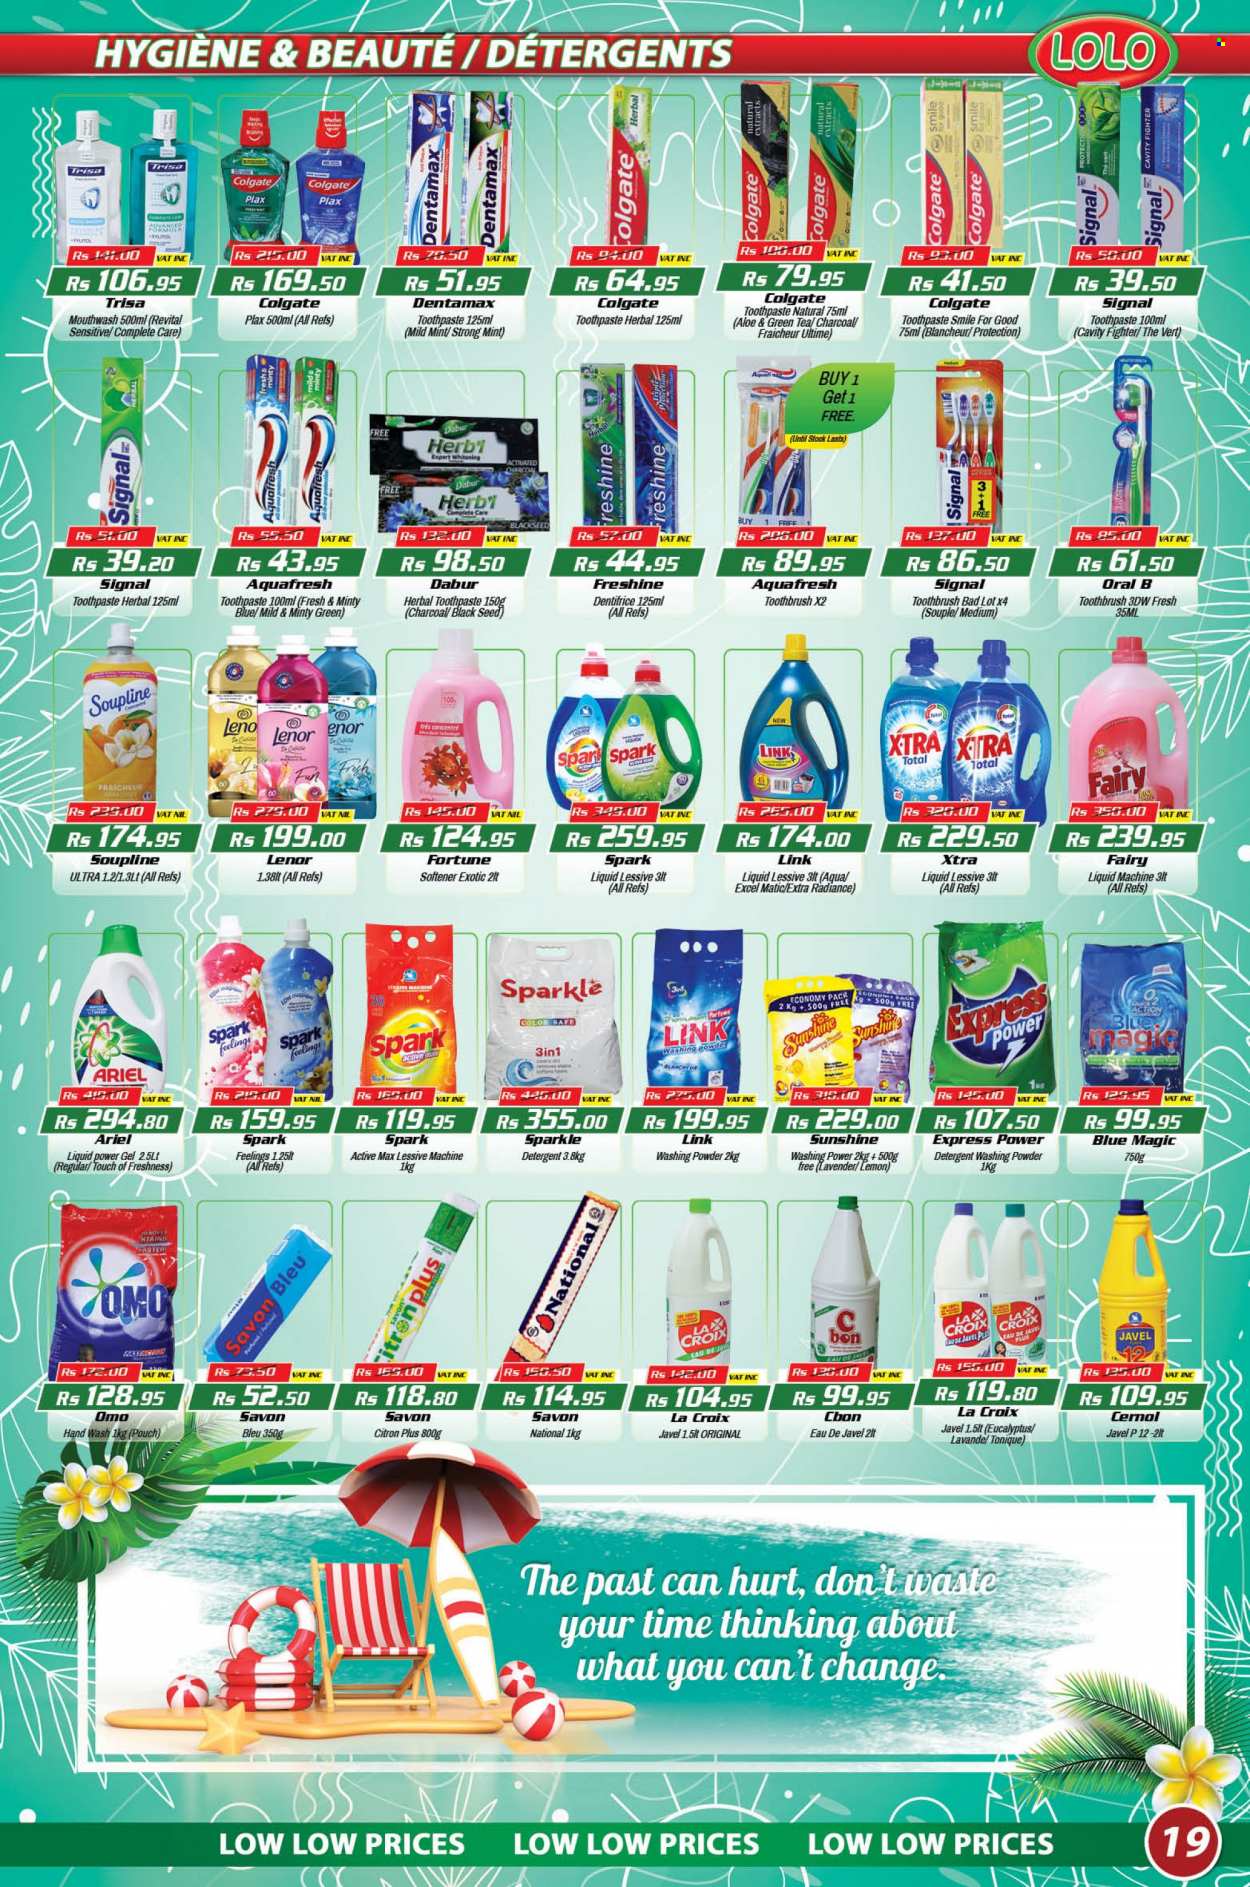 thumbnail - LOLO Hyper Catalogue - 26.08.2022 - 15.09.2022 - Sales products - Sunshine, Dabur, green tea, tea, Fairy, fabric softener, Ariel, Omo, laundry powder, Lenor, XTRA, hand wash, toothbrush, toothpaste, mouthwash, Signal, Plax, plant seeds, activated charcoal, detergent, Colgate, Oral-B. Page 19.